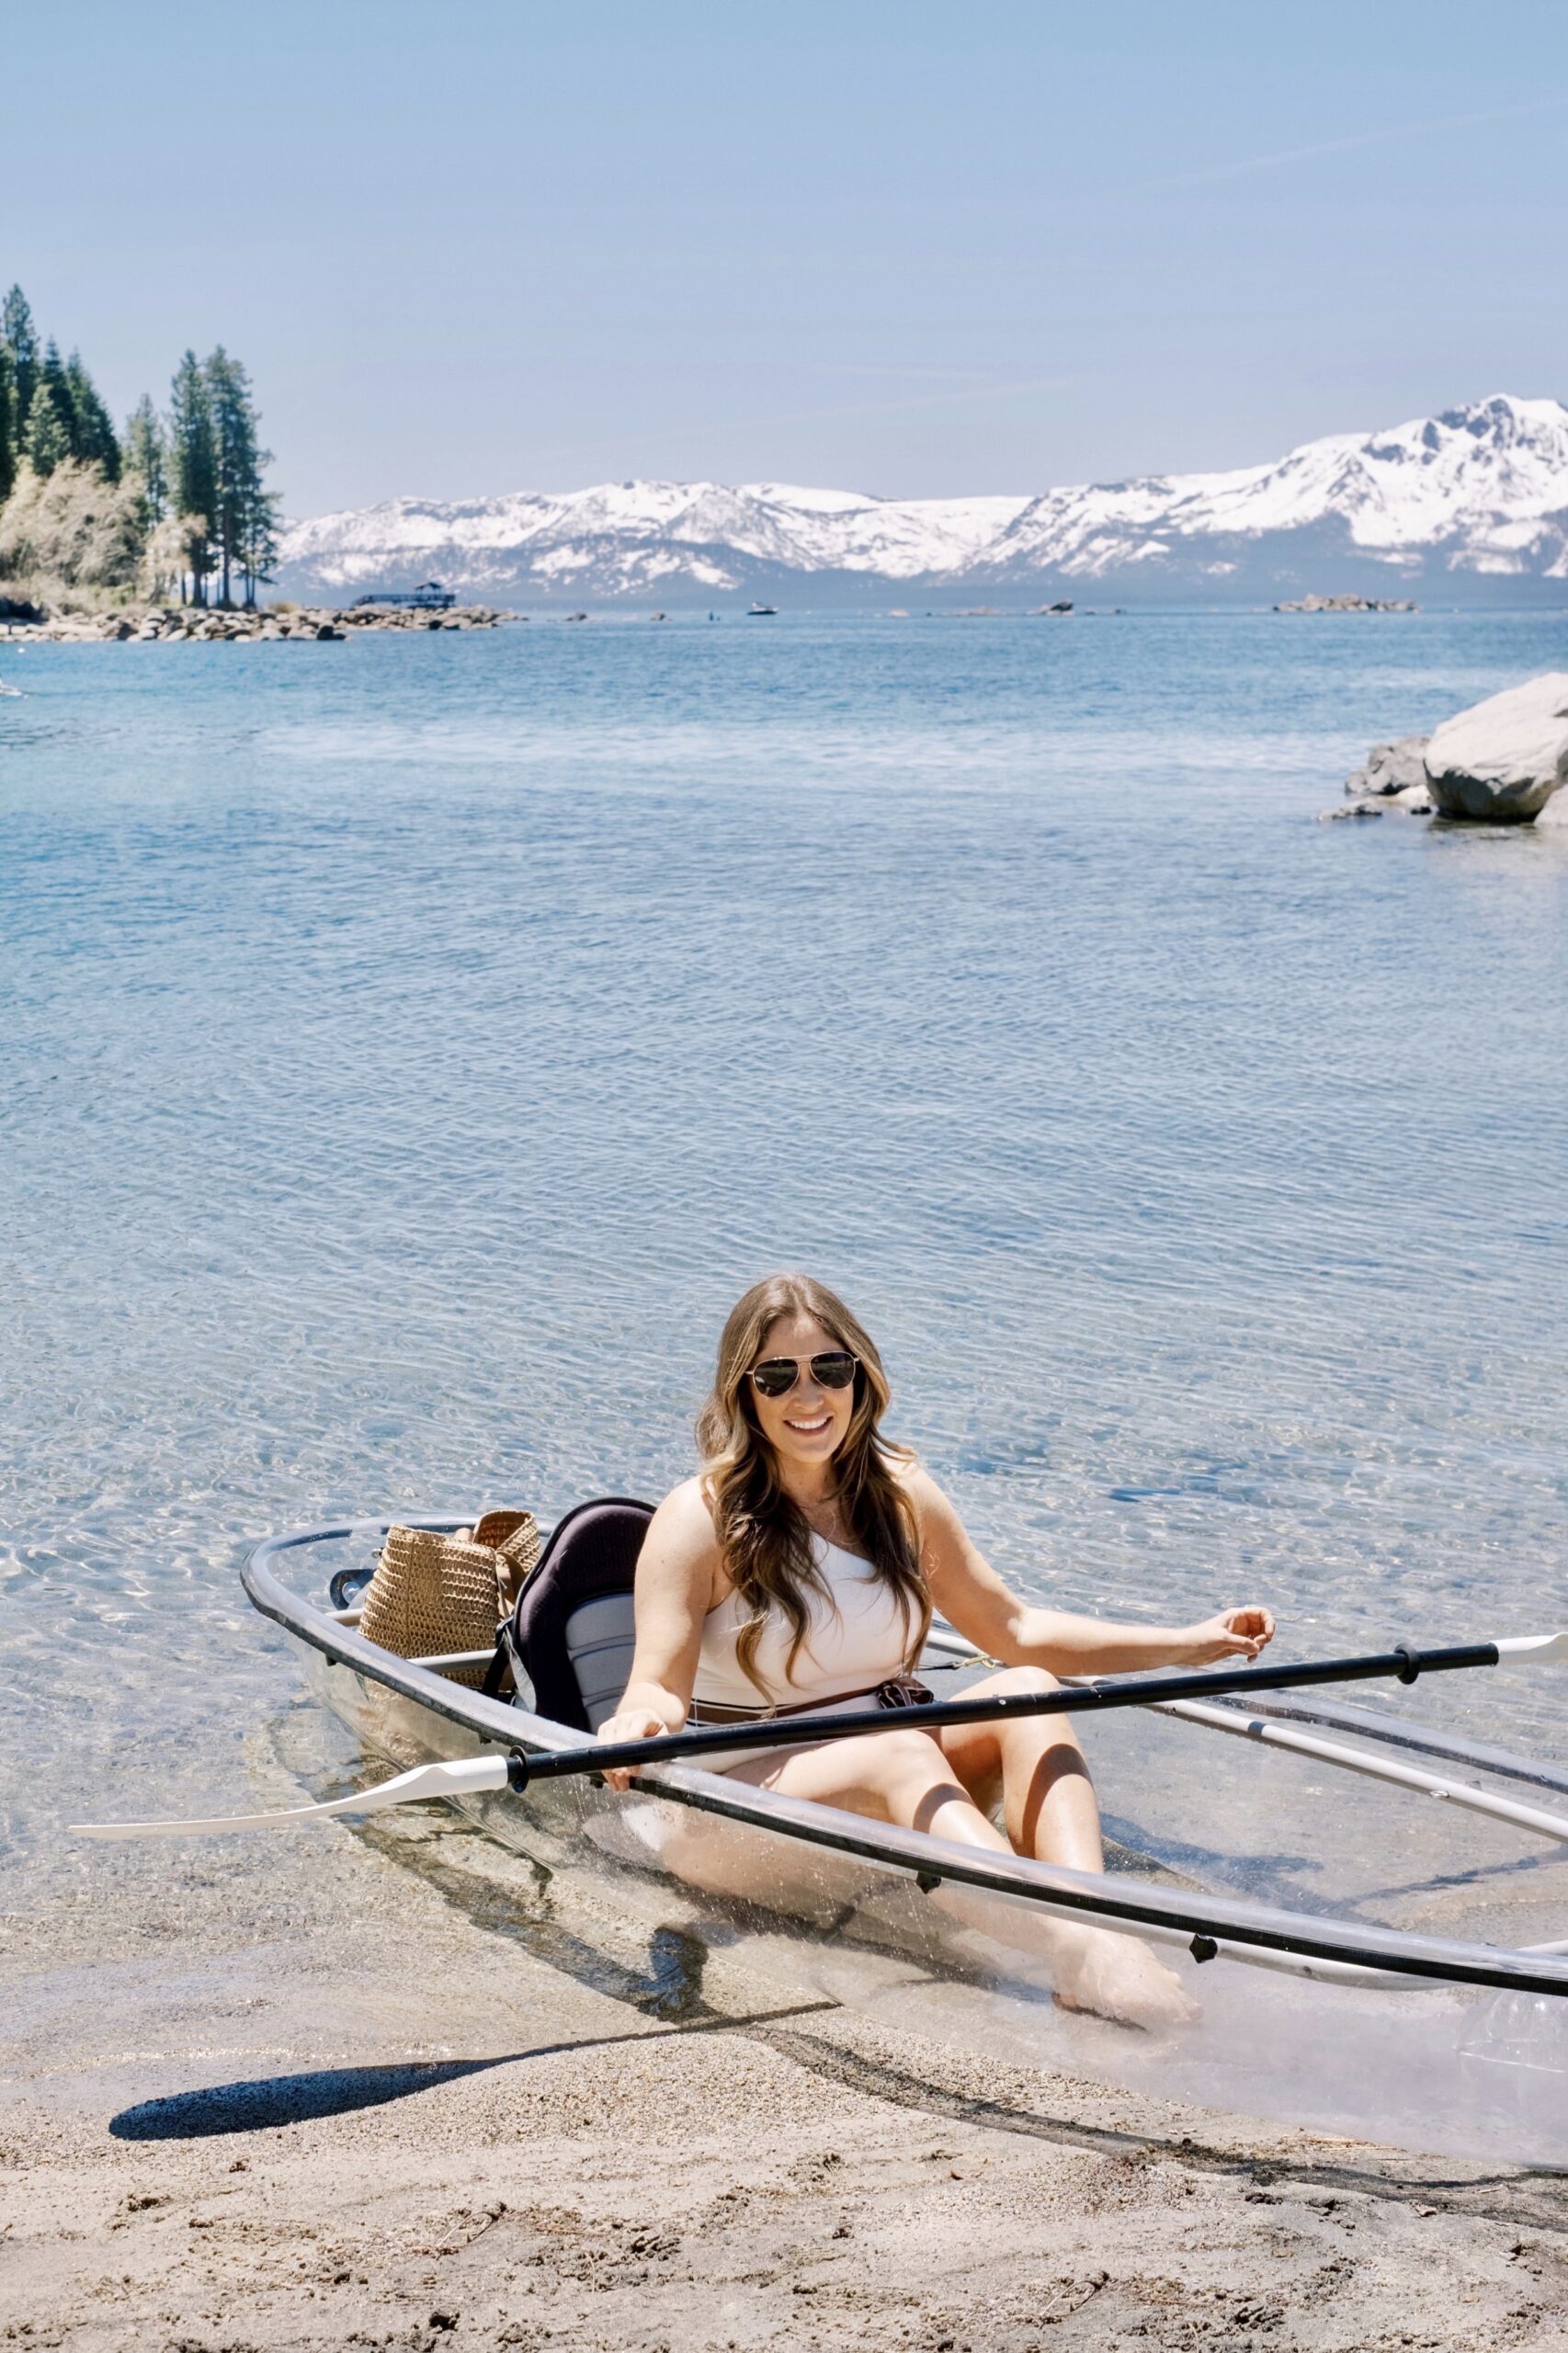 Lake Tahoe Summer Activities, Top Things to Do